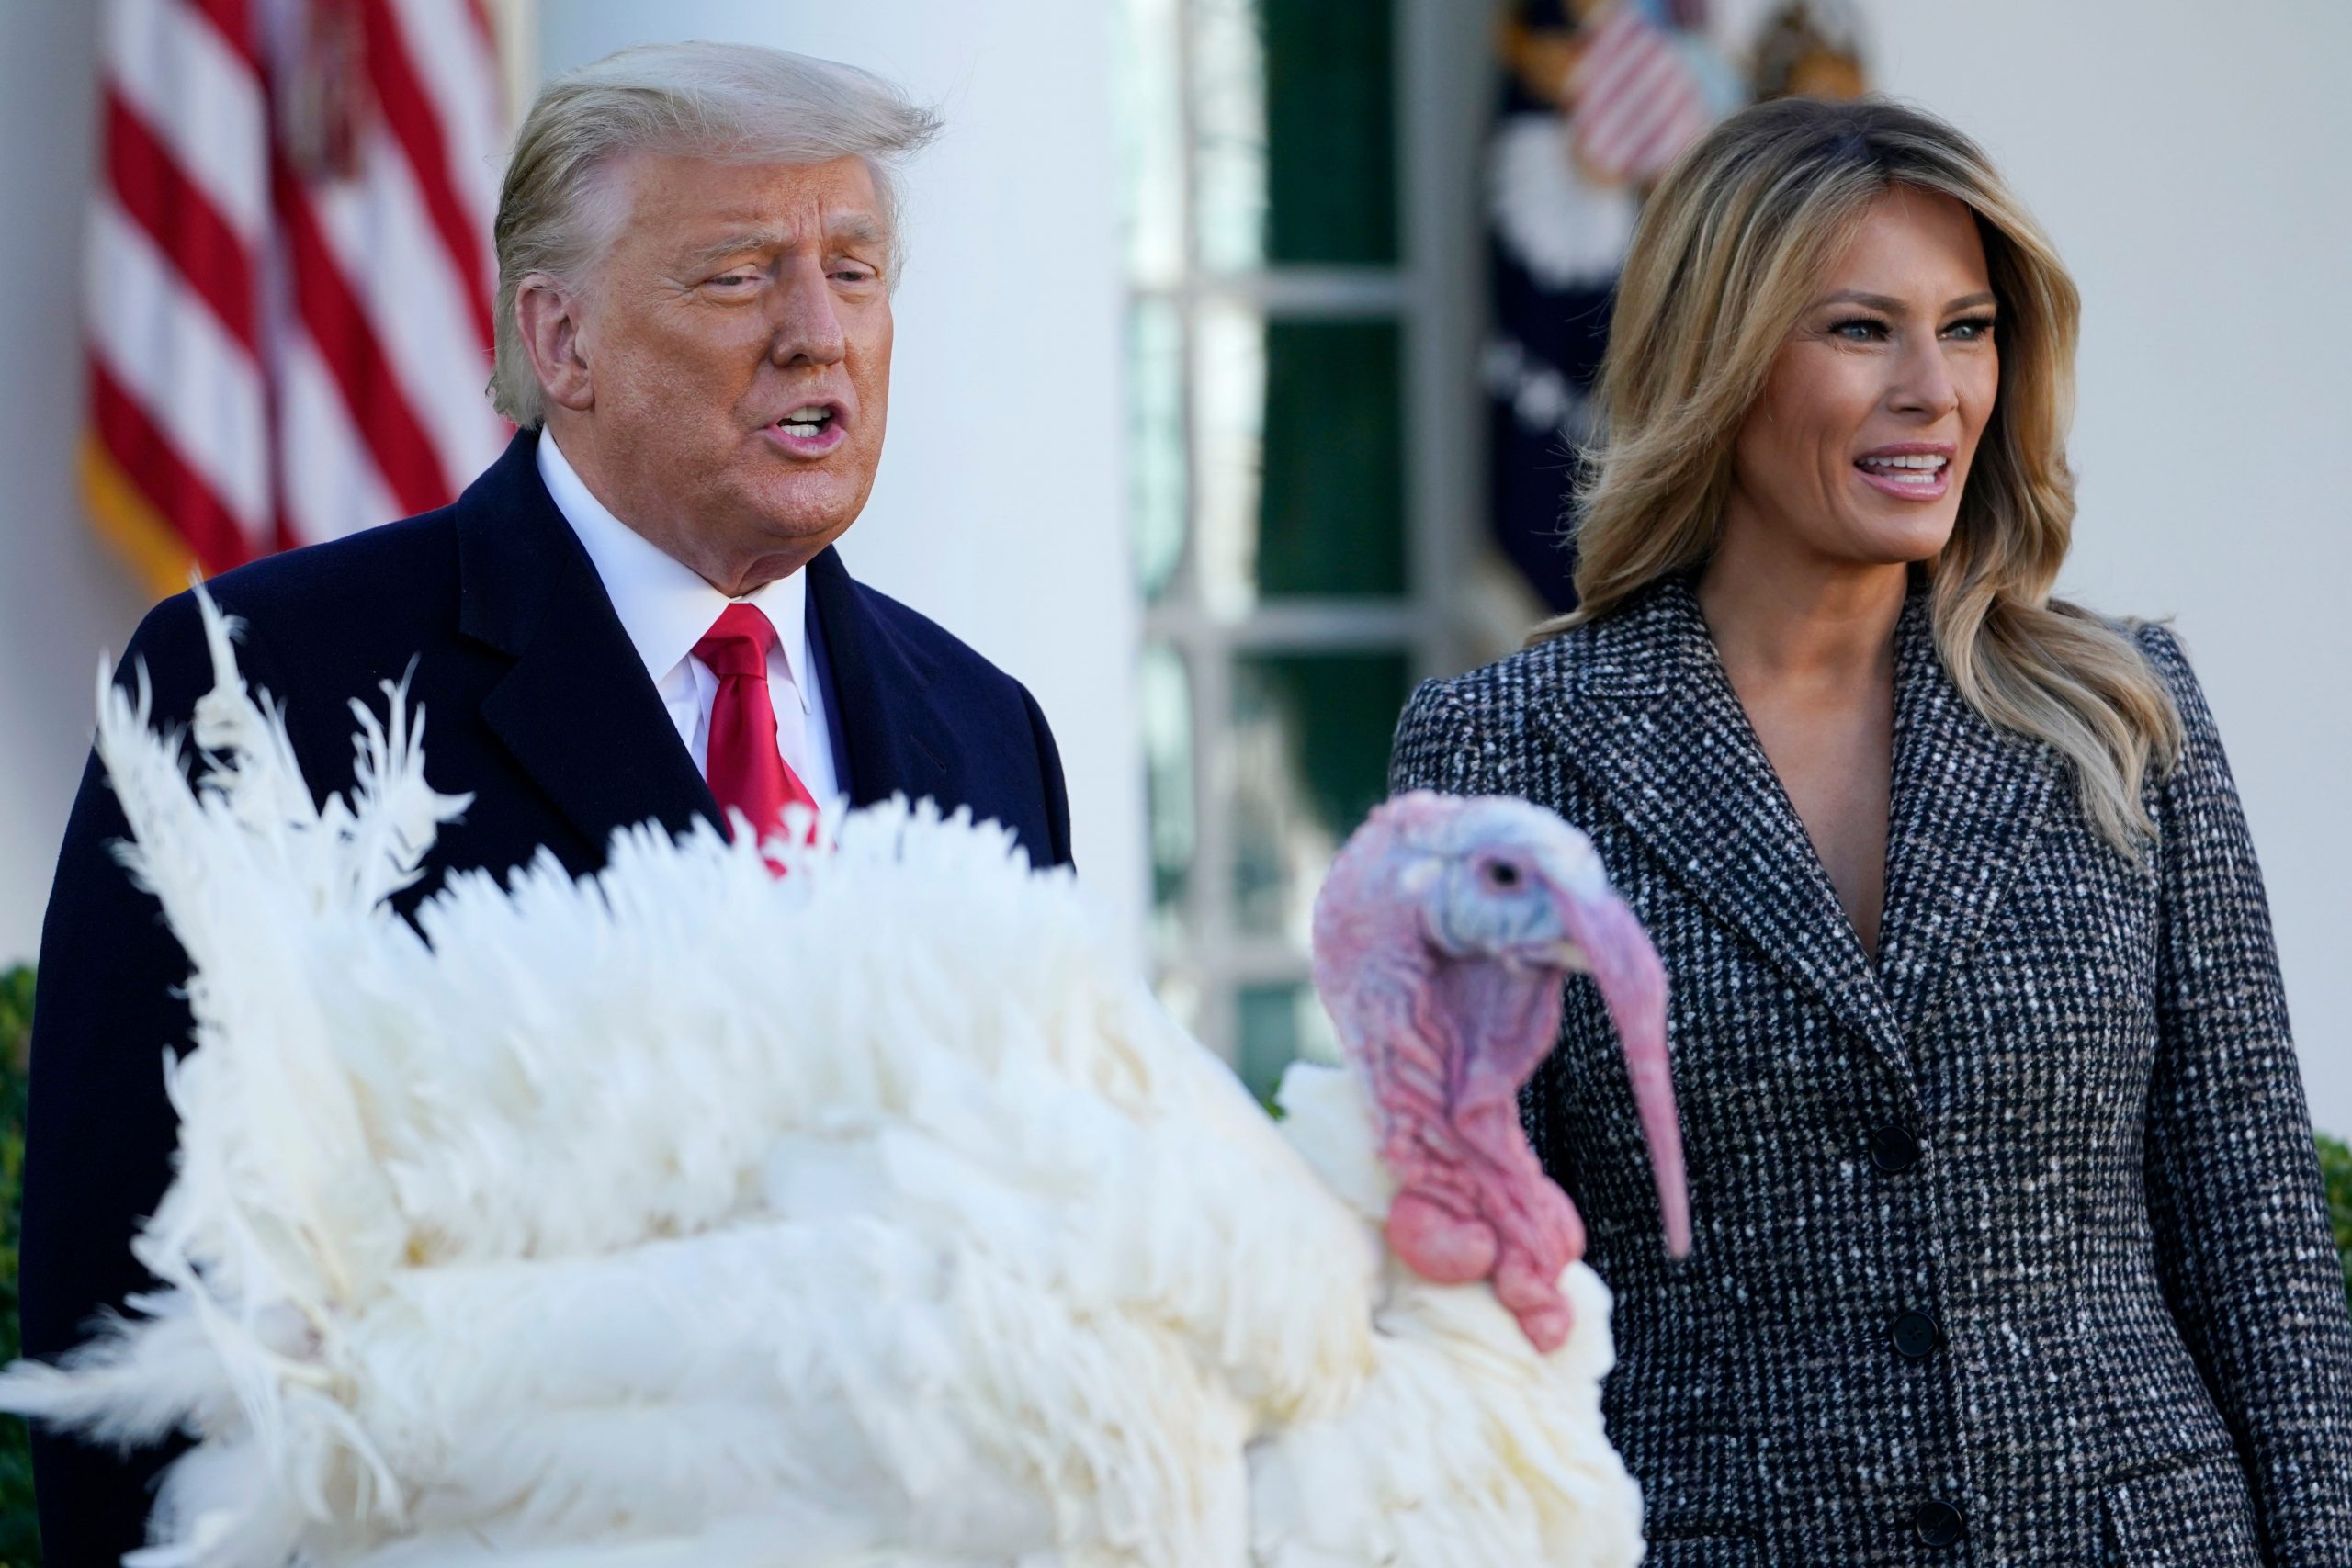 US celebrates Thanksgiving today amid COVID-19 pandemic